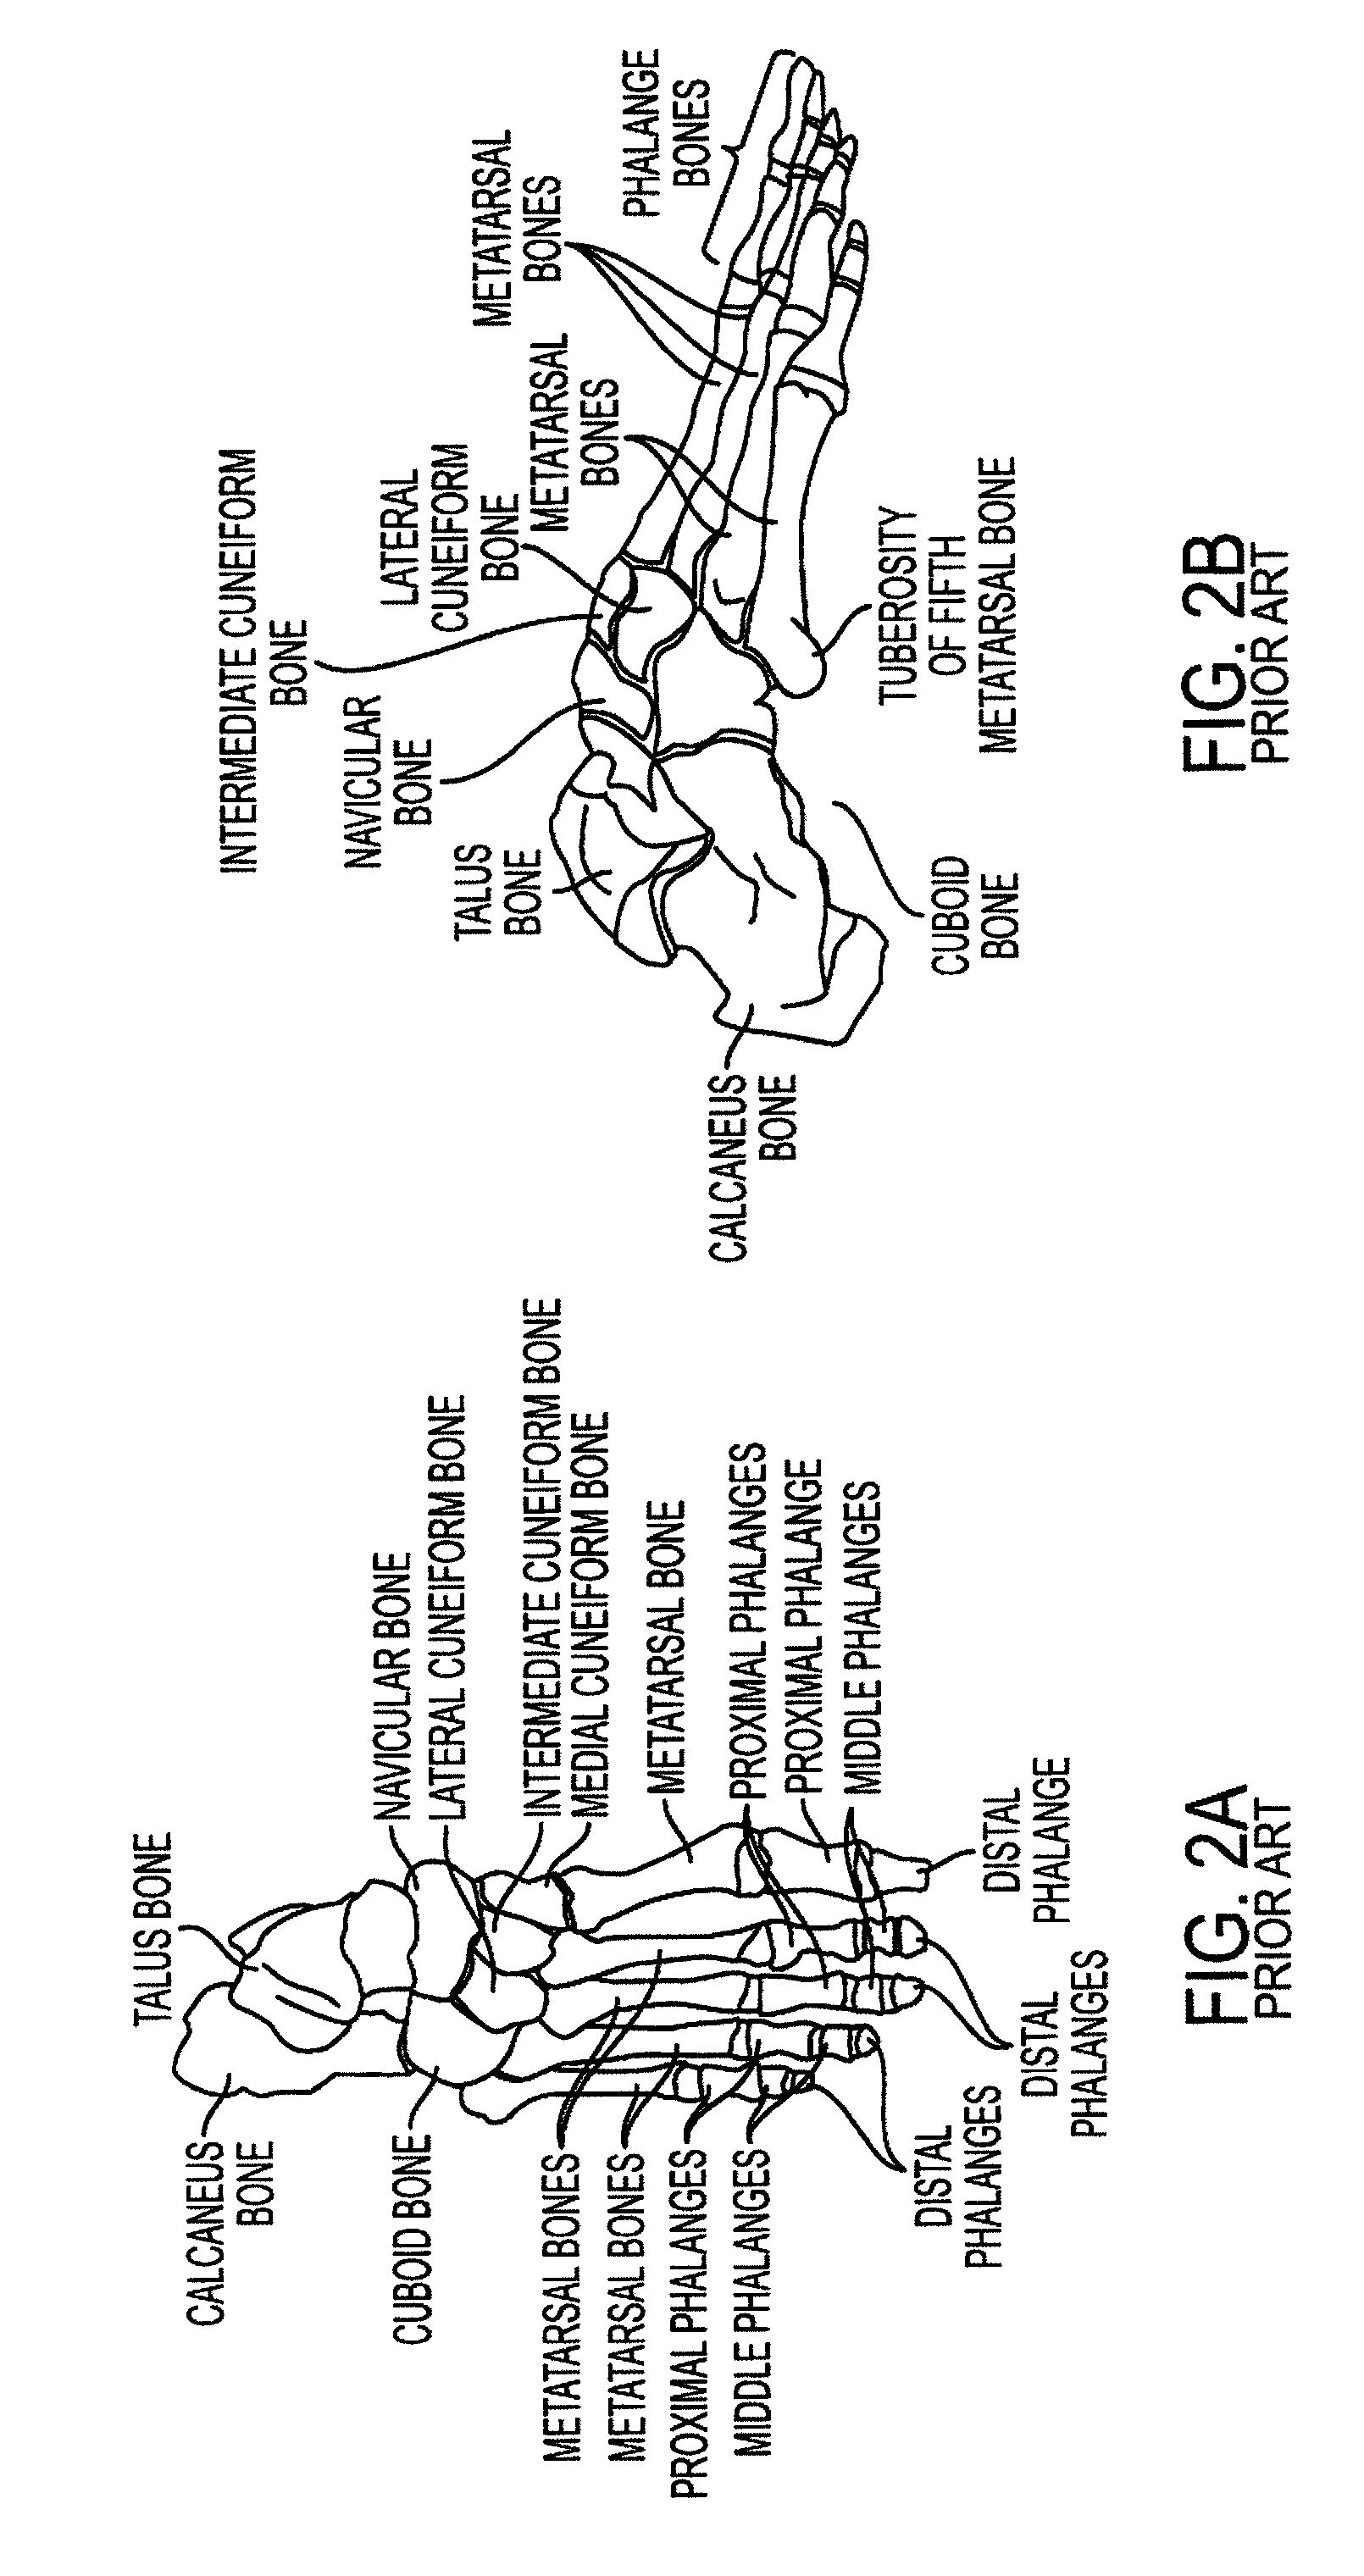 System, method, and computer-program product for measuring pressure points